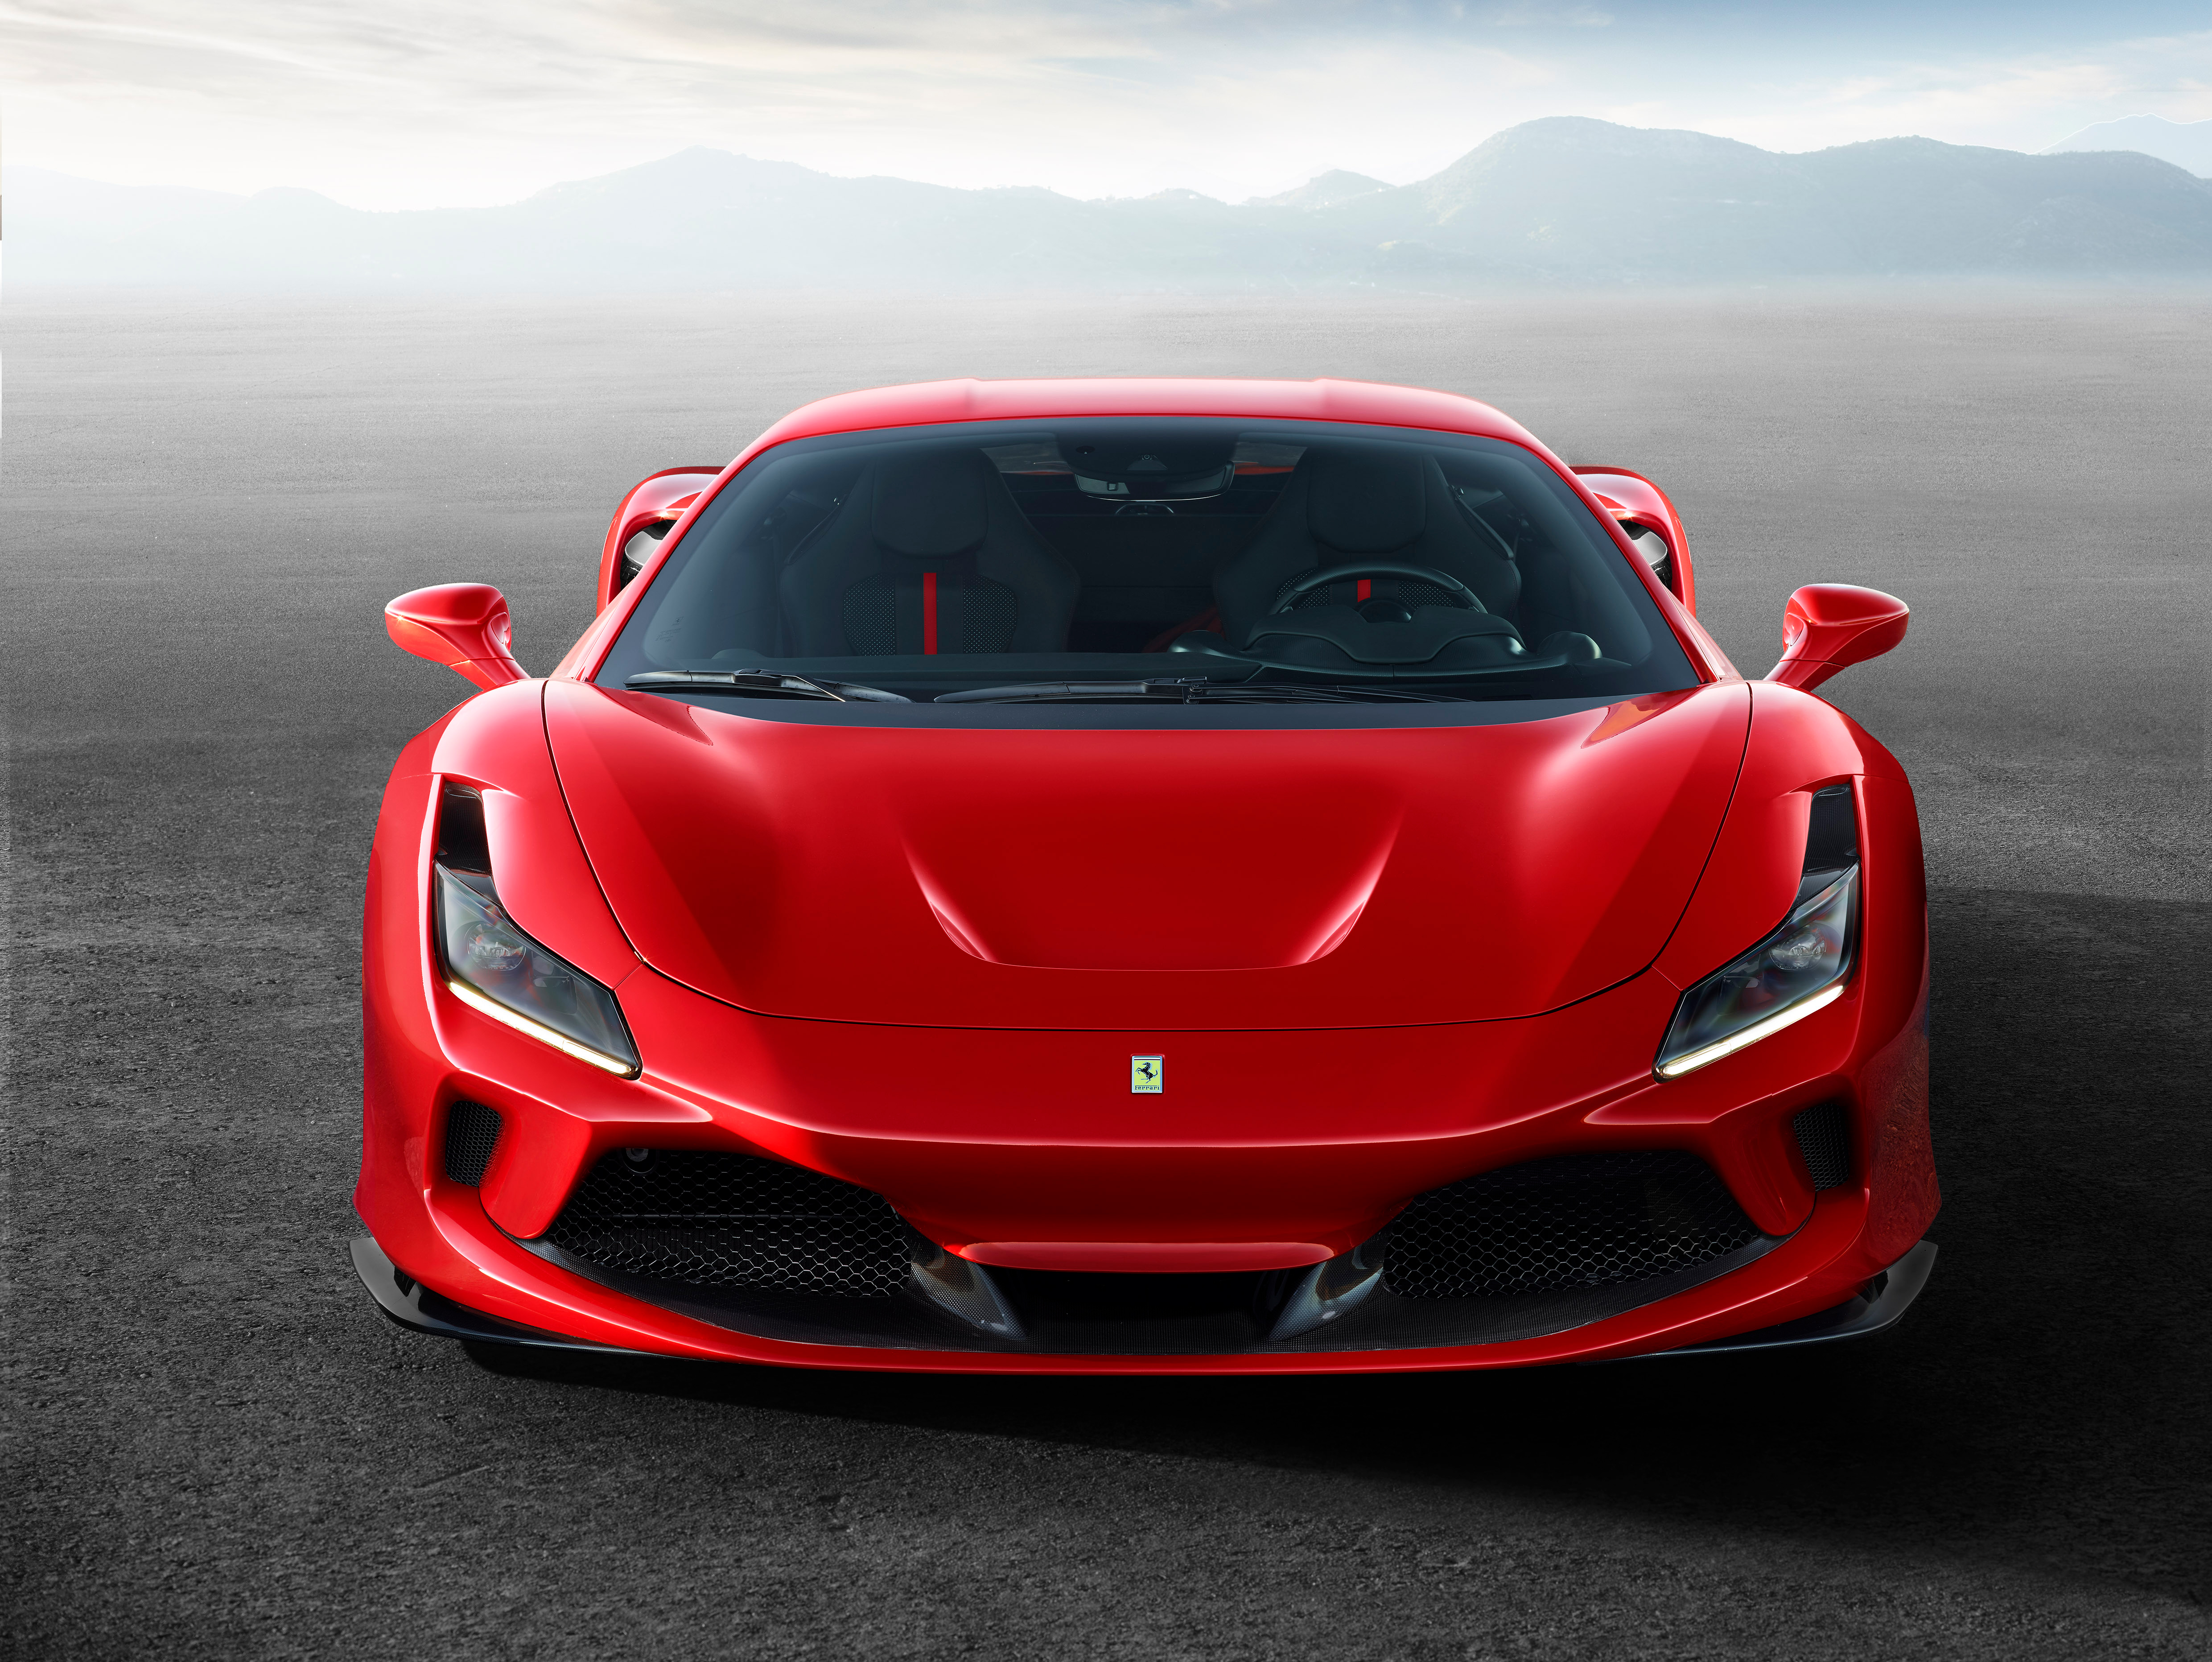 Ferrari F8 Tributo 2019 Hd Cars 4k Wallpapers Images Backgrounds Photos And Pictures